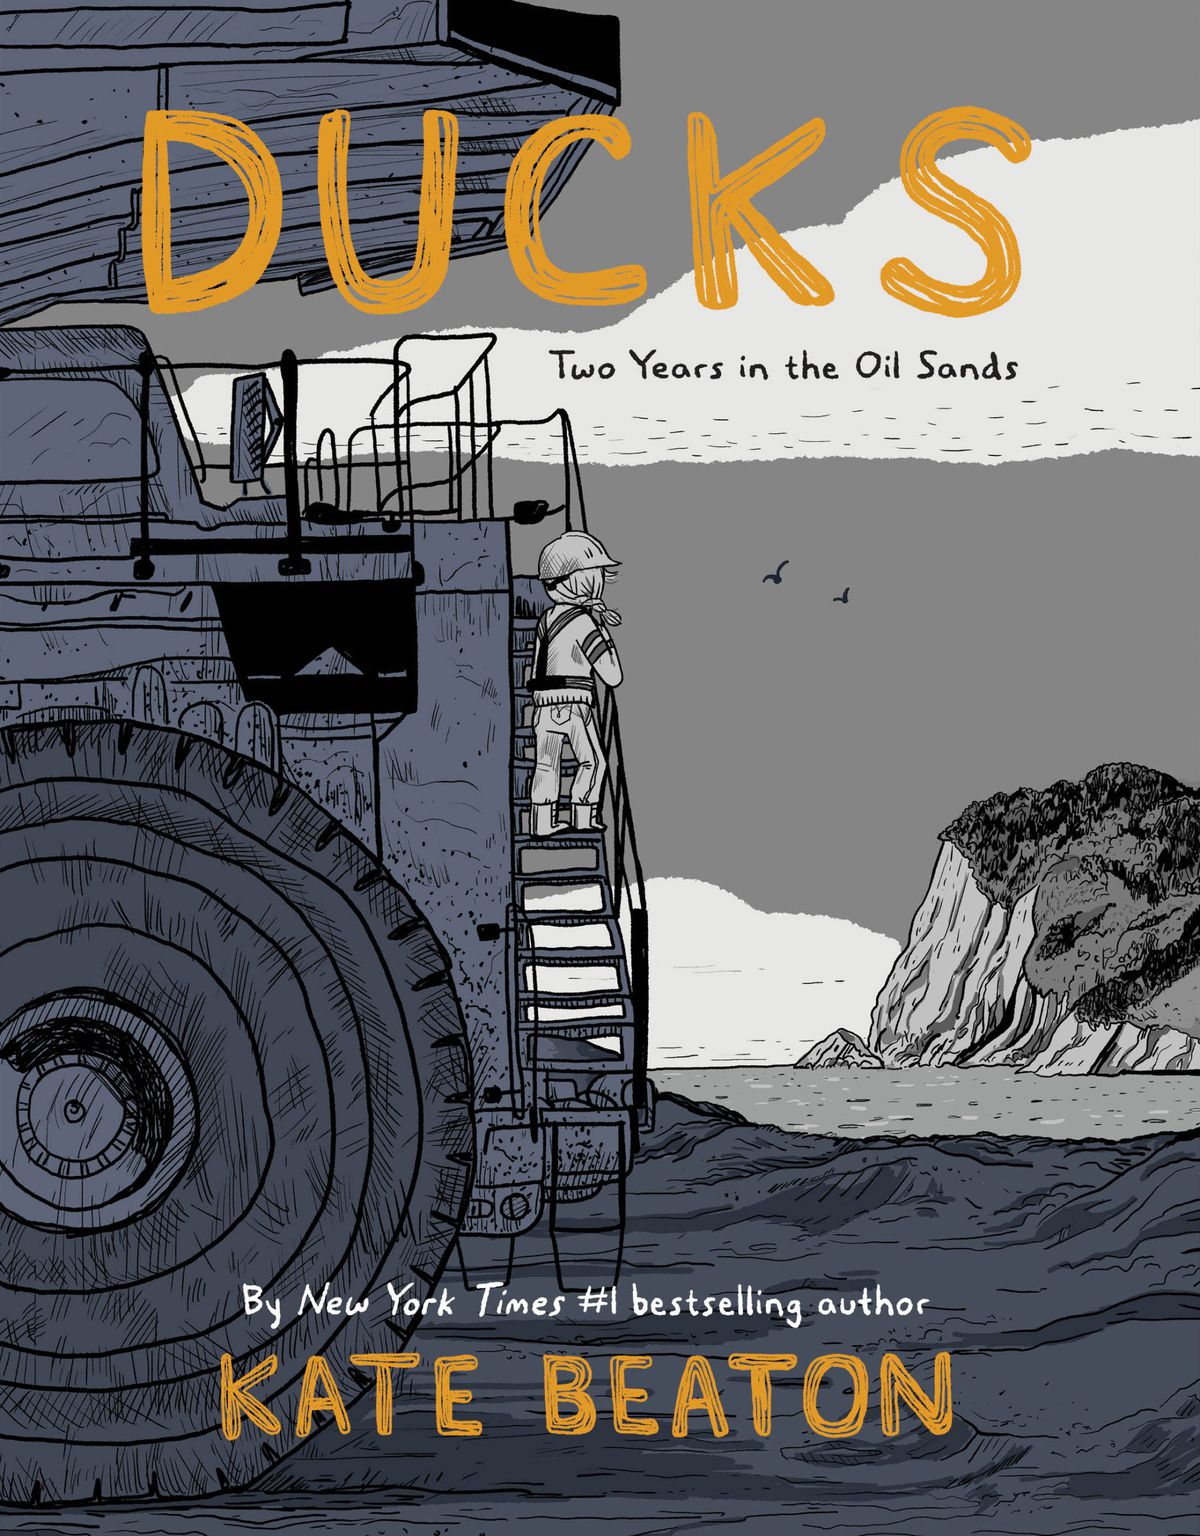 A woman wearing a hard hat stands on a huge piece of construction machinery, looking out at ocean cliffs on the cover of Ducks: Two Years in the Old Sands.